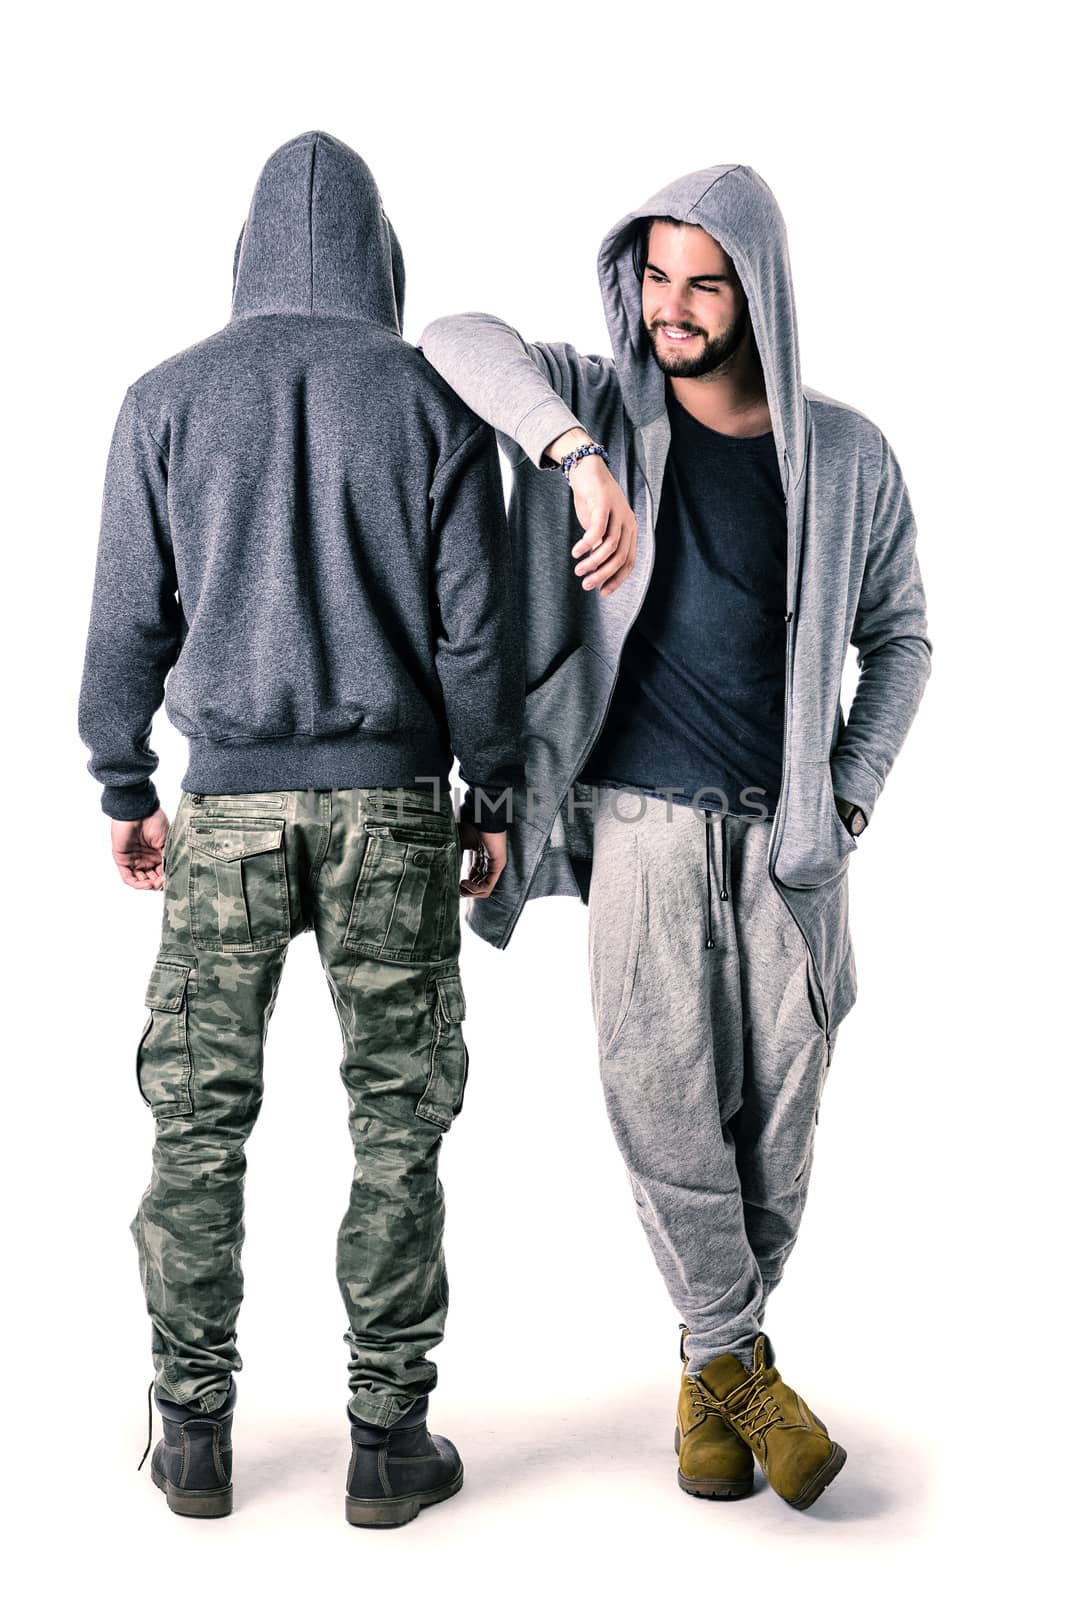 Two young men wearing military and sport clothes by artofphoto